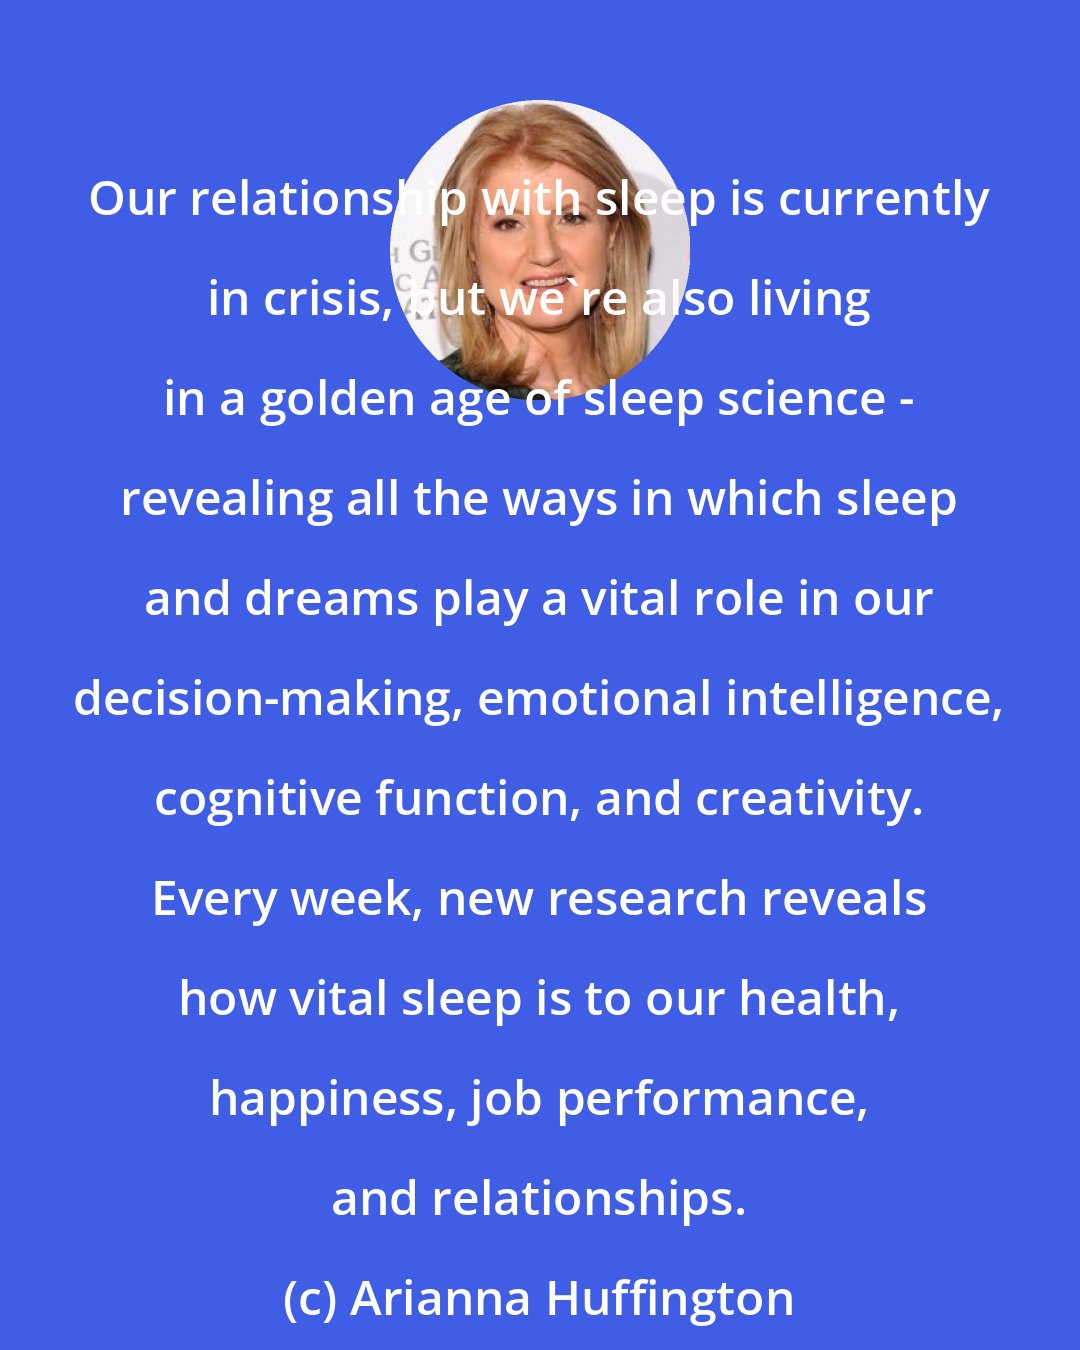 Arianna Huffington: Our relationship with sleep is currently in crisis, but we're also living in a golden age of sleep science - revealing all the ways in which sleep and dreams play a vital role in our decision-making, emotional intelligence, cognitive function, and creativity. Every week, new research reveals how vital sleep is to our health, happiness, job performance, and relationships.